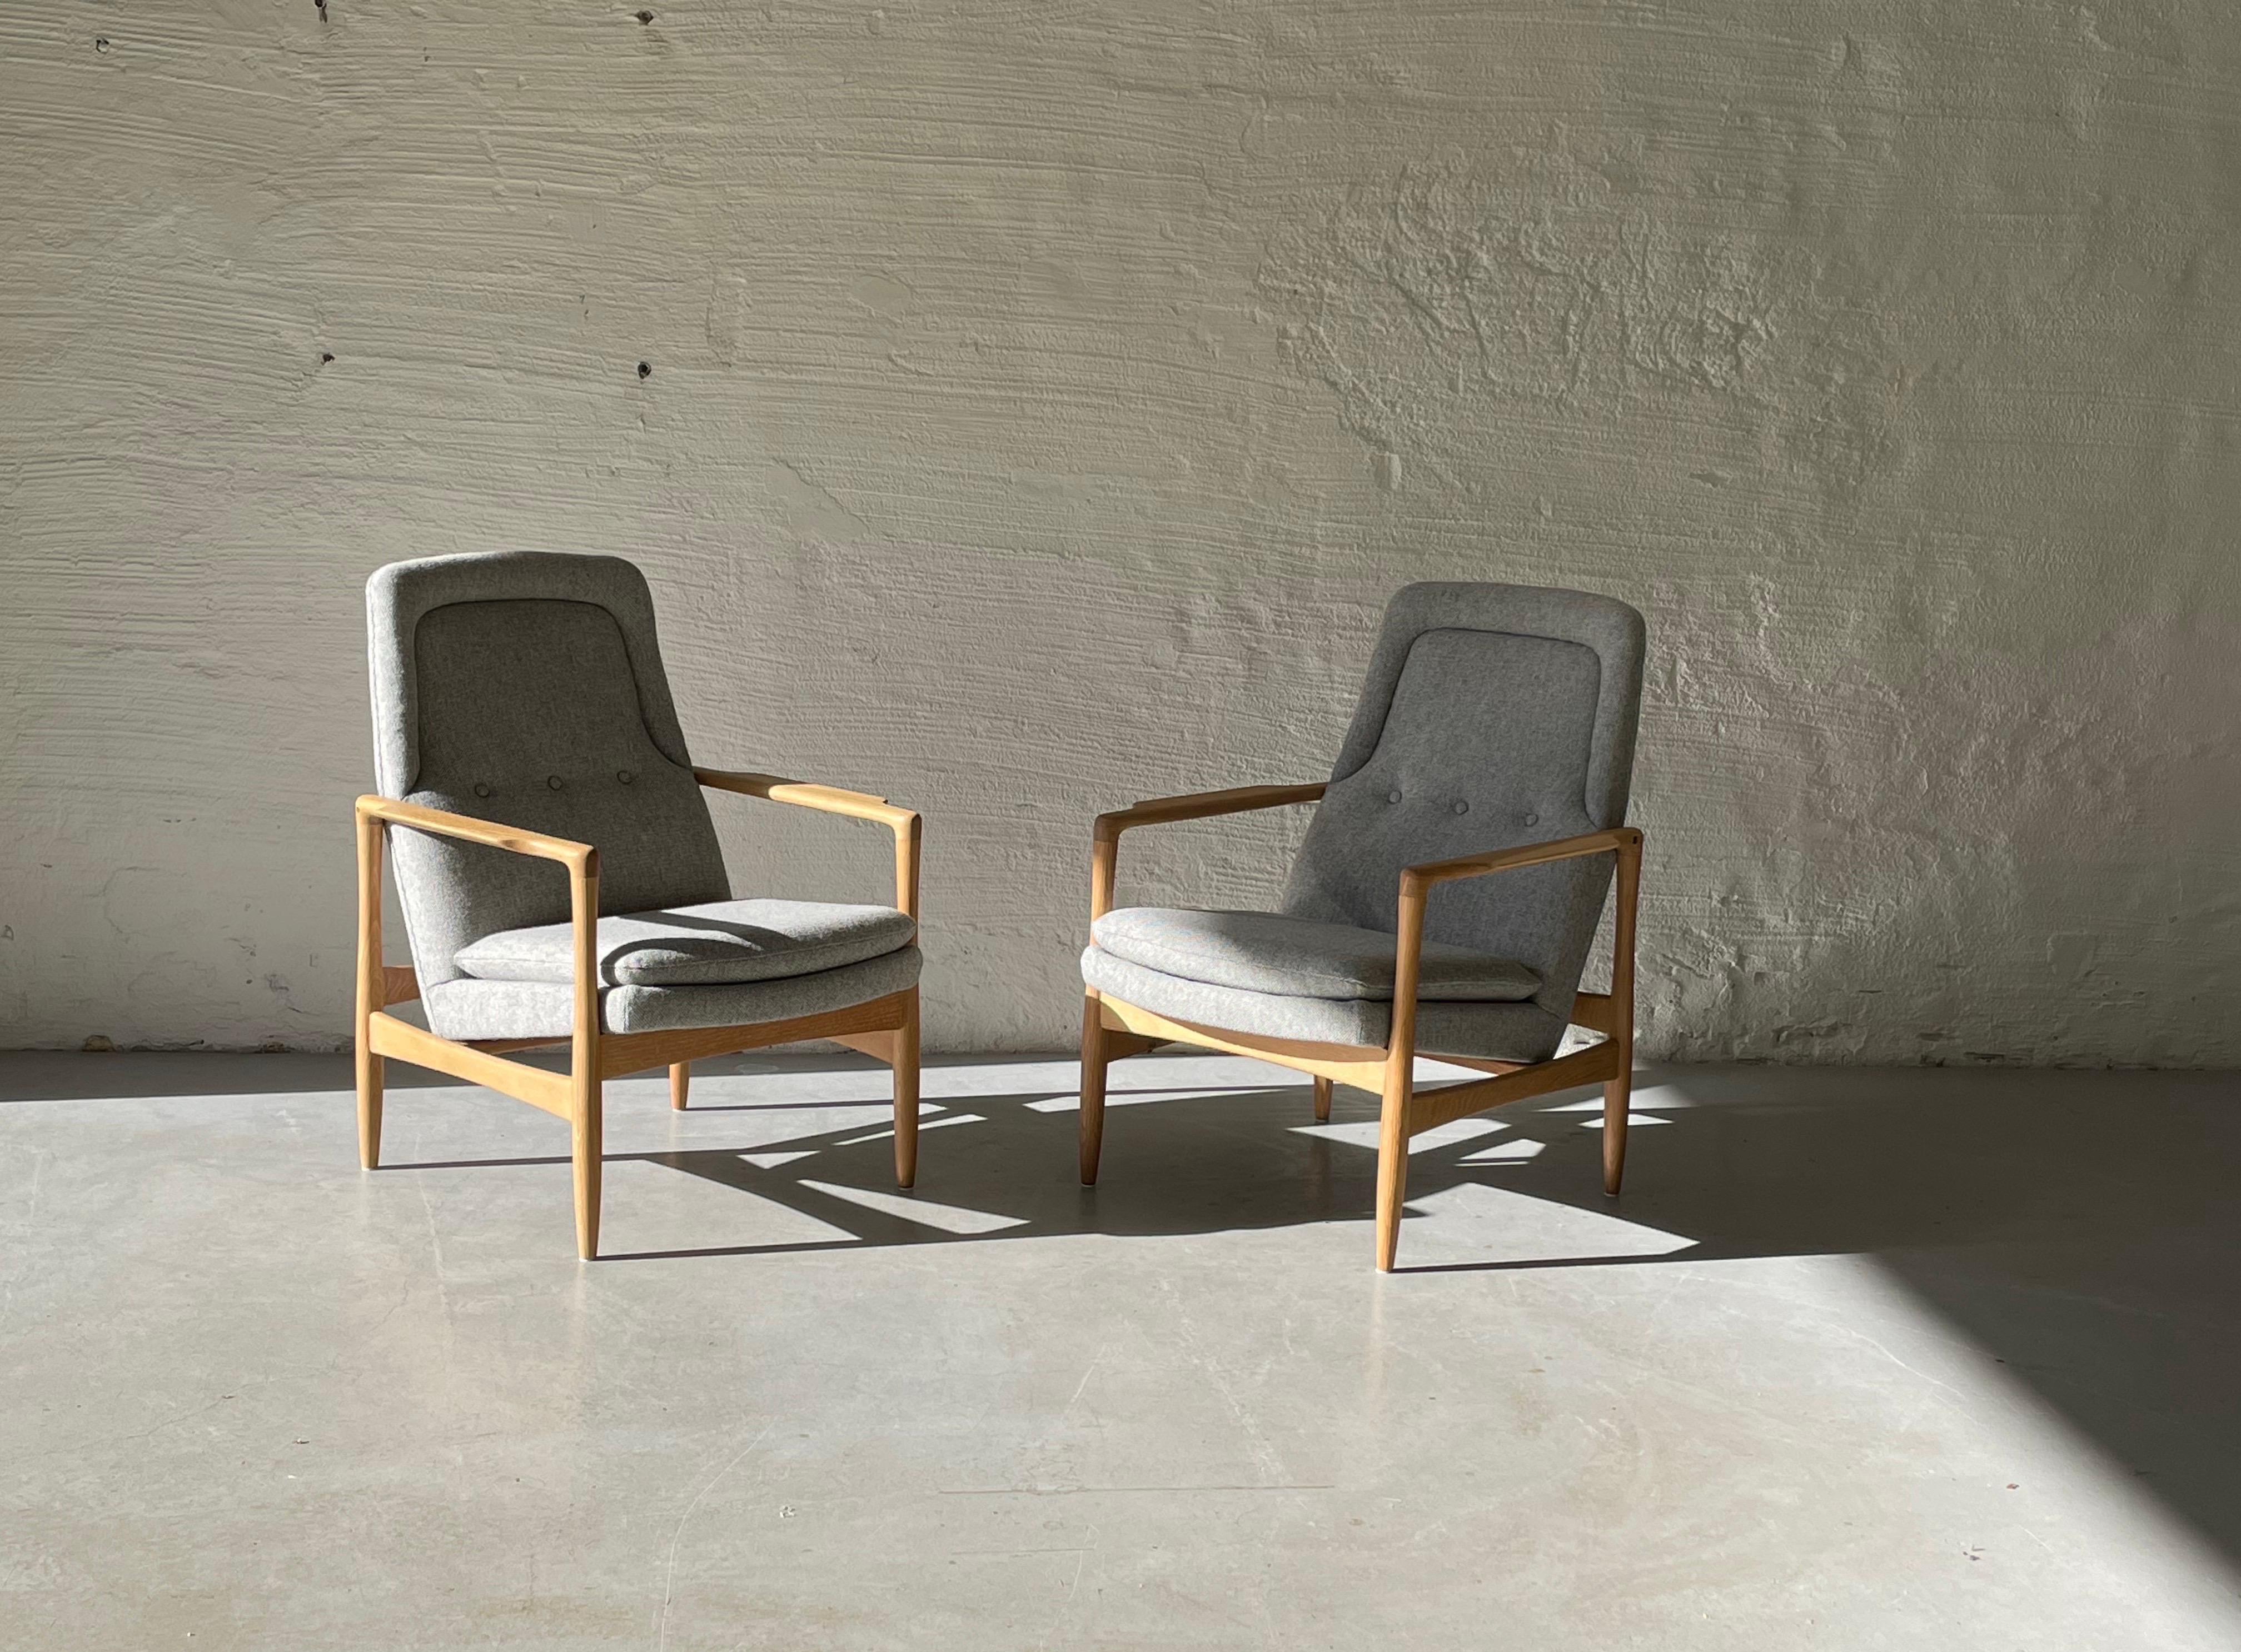 Selling two armchairs model Lobby designed by Torbjørn Afdal for Bruksbo Tegnekontor, 1957. Produced by Svein Bjørneng møbelfabrikk, Norway
The chairs are reupholstered in woolen fabric from Gudbrandsdalens Uldvarefabrikk and are in very good